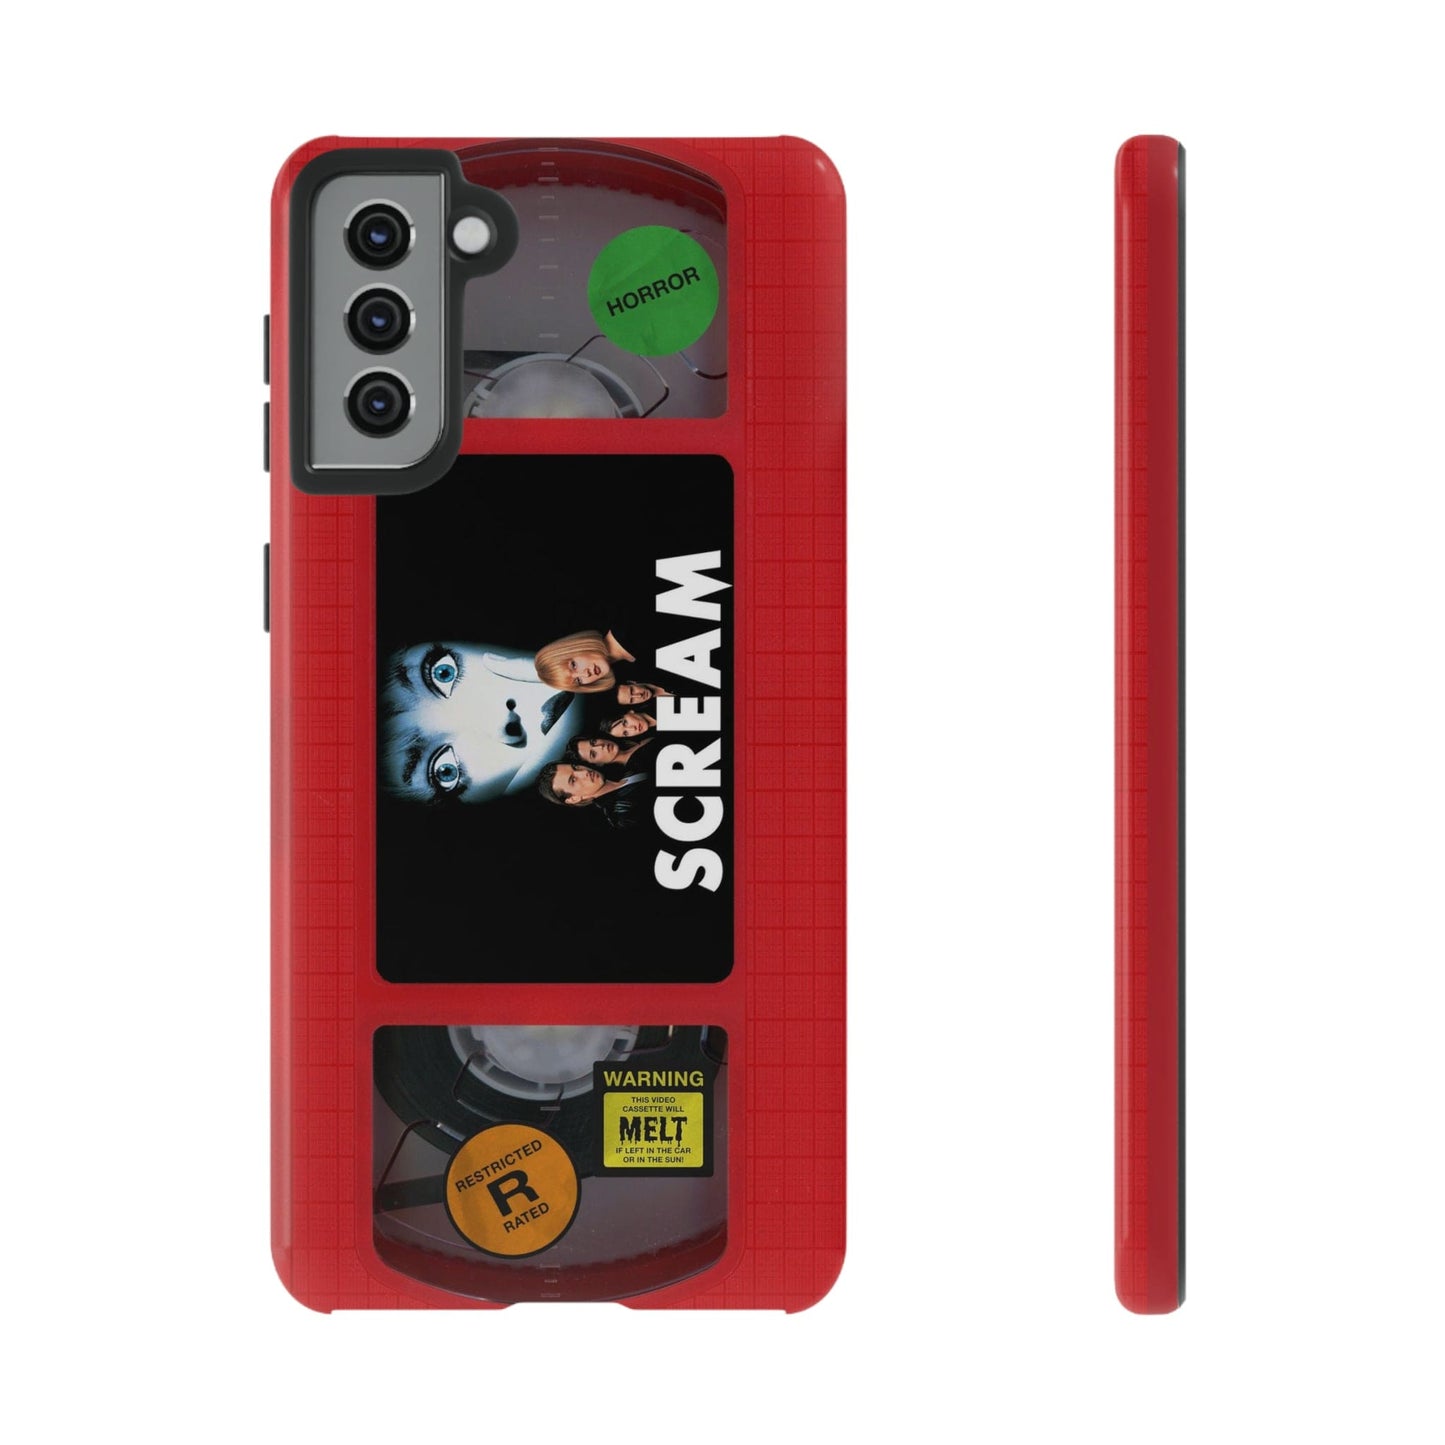 Scream Red Limited Edition Impact Resistant VHS Phone Case